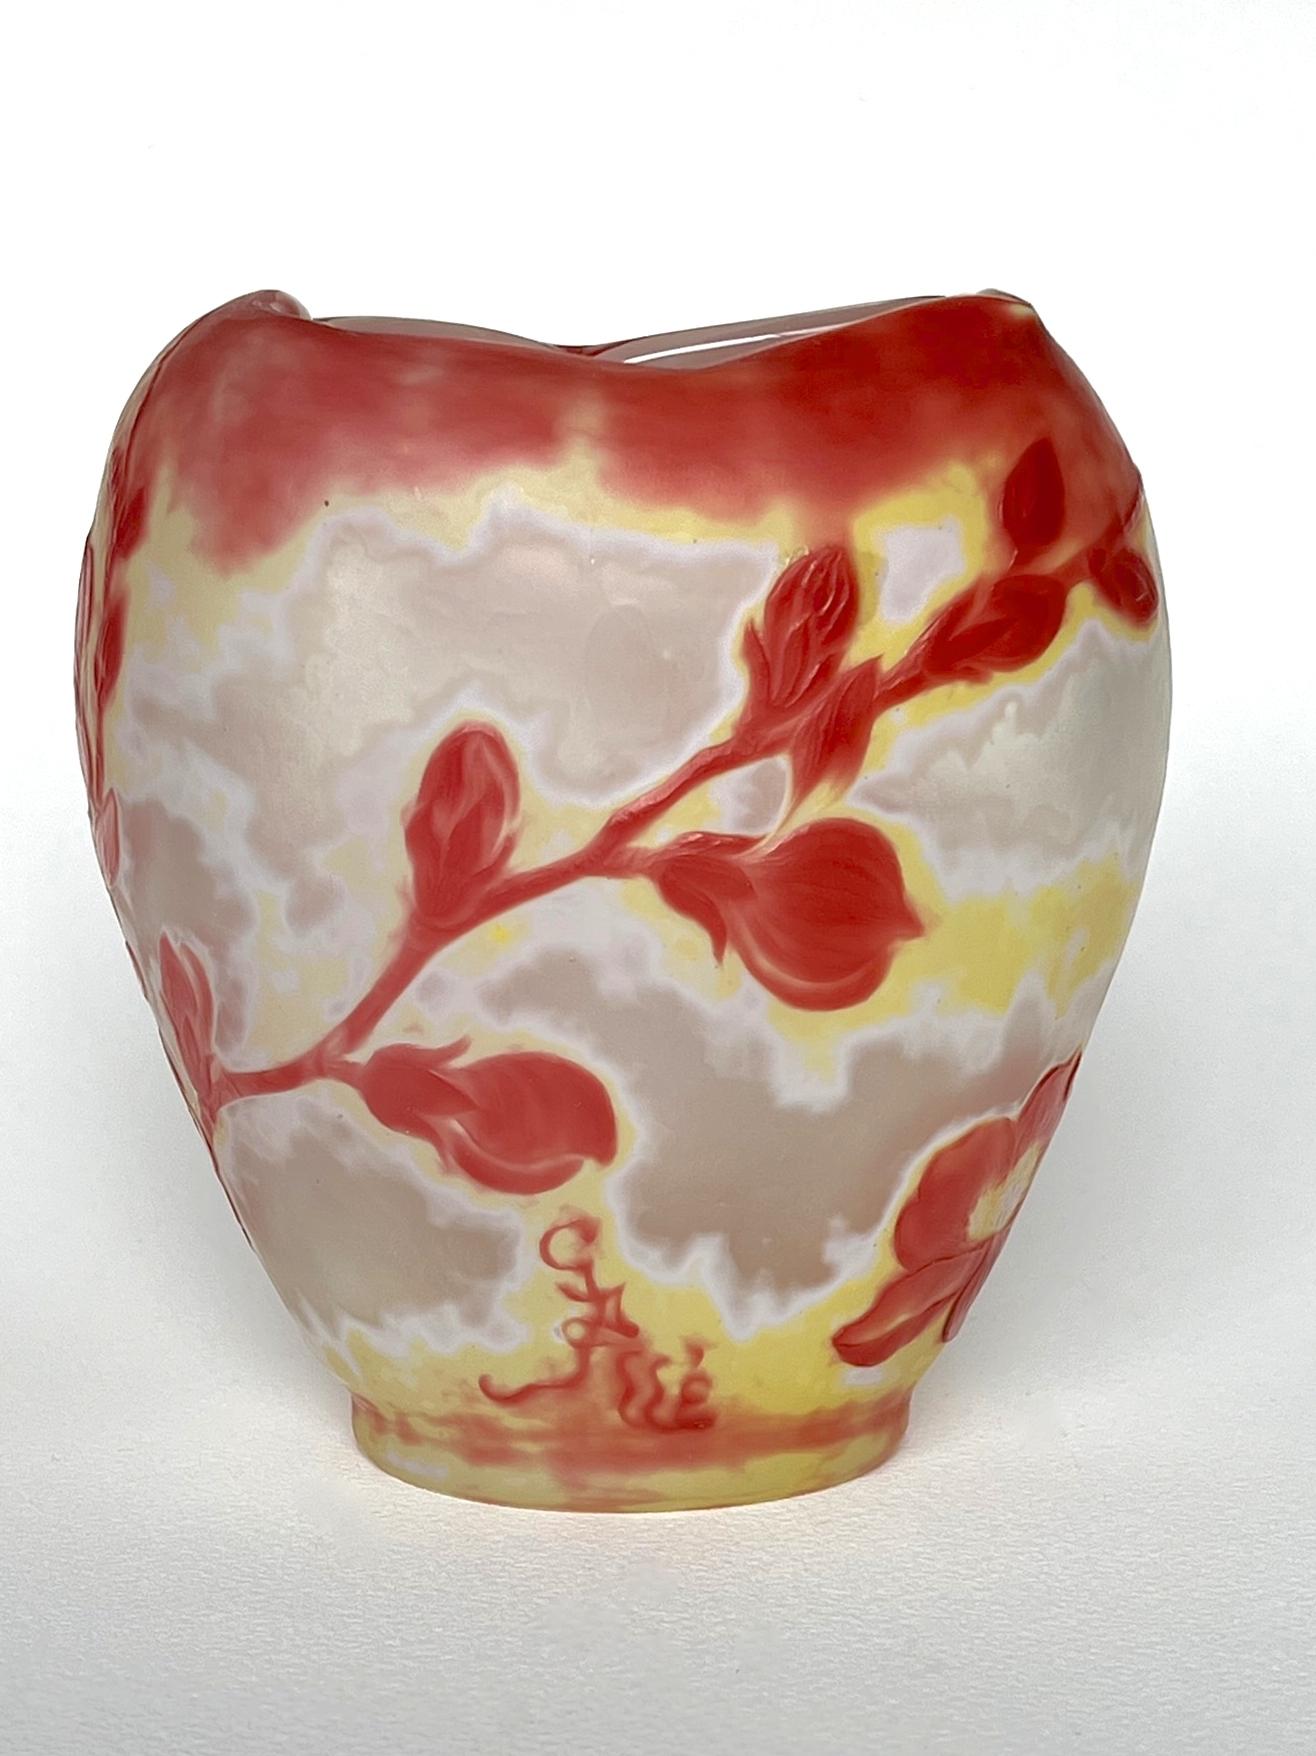 A very fine and rare cameo glass vase from France's leading 'Maître Verrier' (master glass-maker),  Émile Gallé. The vase is of a flattened heart-shape, with a pinched irregular rim and consists of four layers of glass - a deep dusky rose, yellow